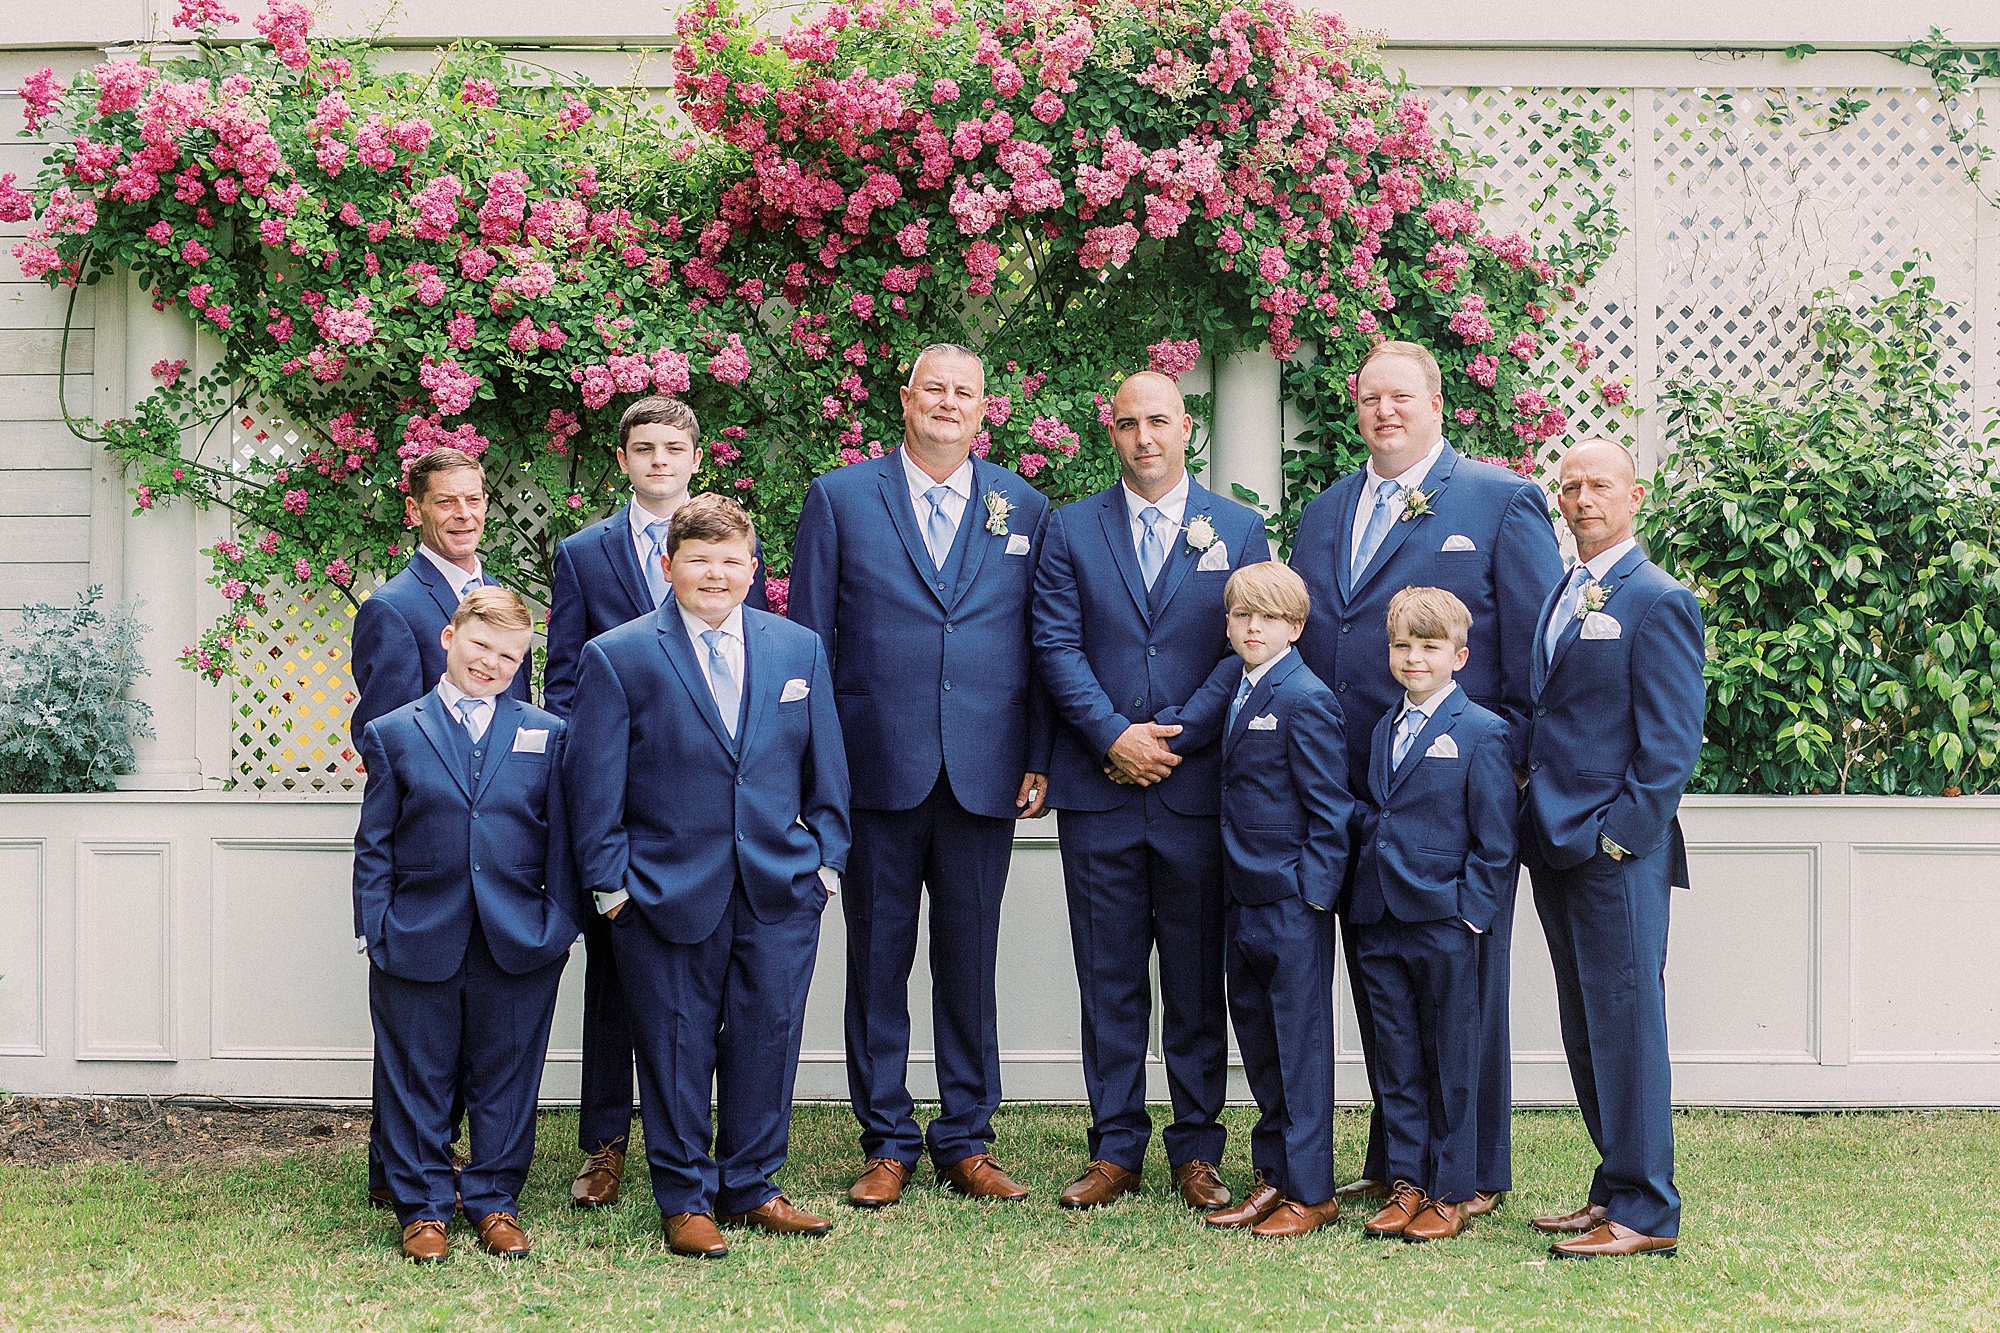 groom poses with groomsmen in navy suits in gardens at Separk Mansion